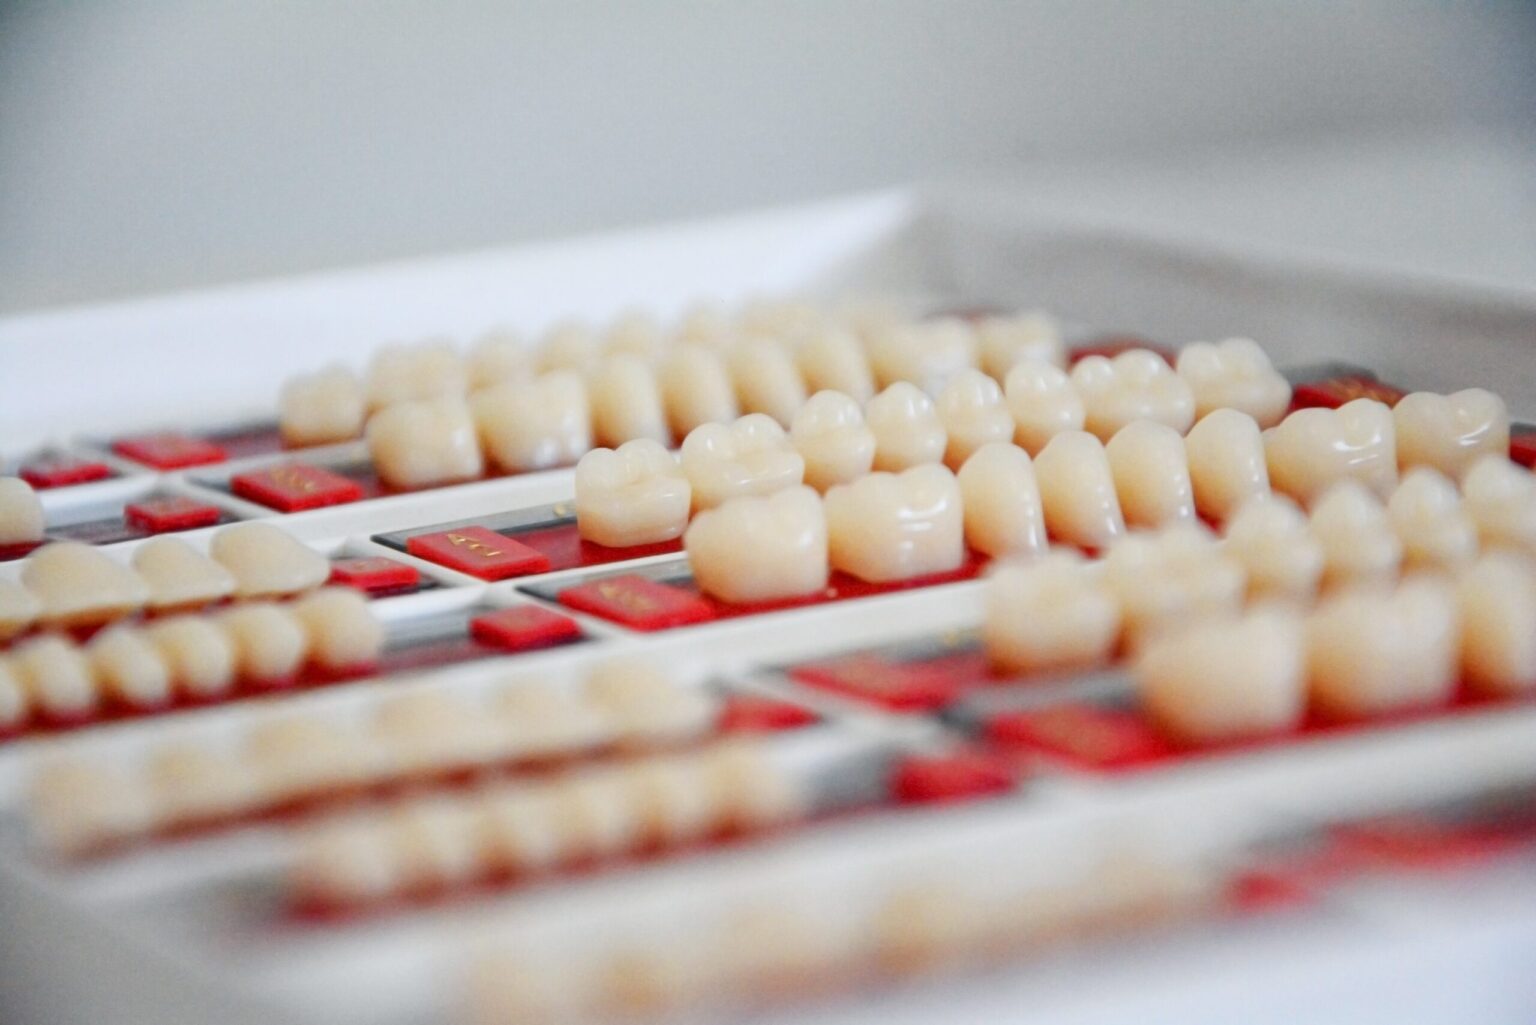 A dental shade guide used by a Dallas dentist, displaying various shades of prosthetic teeth for color matching.